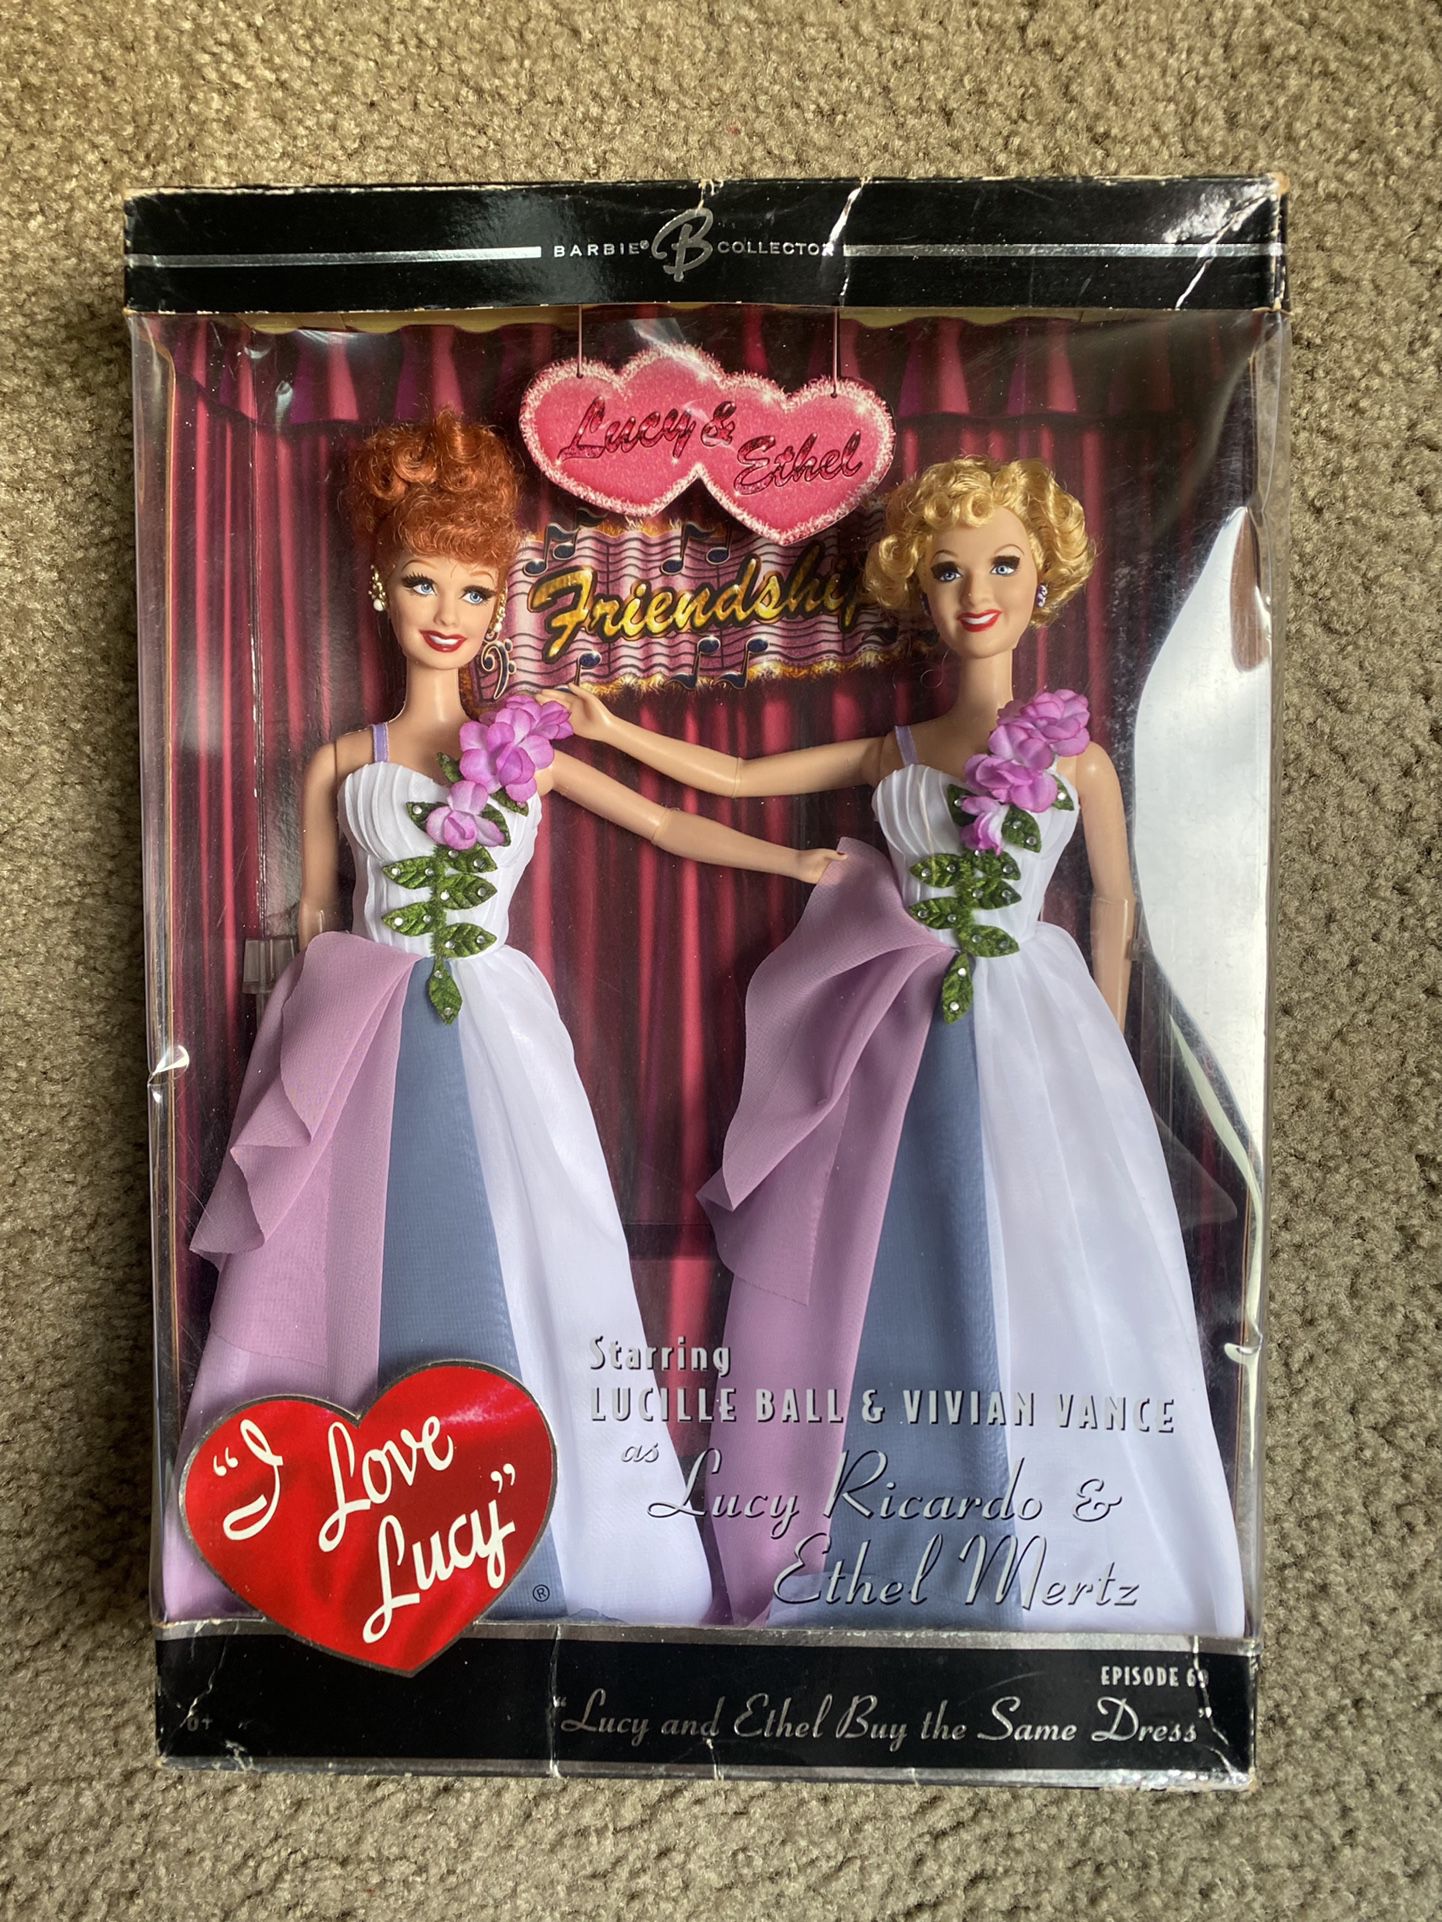 I Love Lucy “Lucy and Ethel Buy the Same Dress” Barbie Doll Giftset